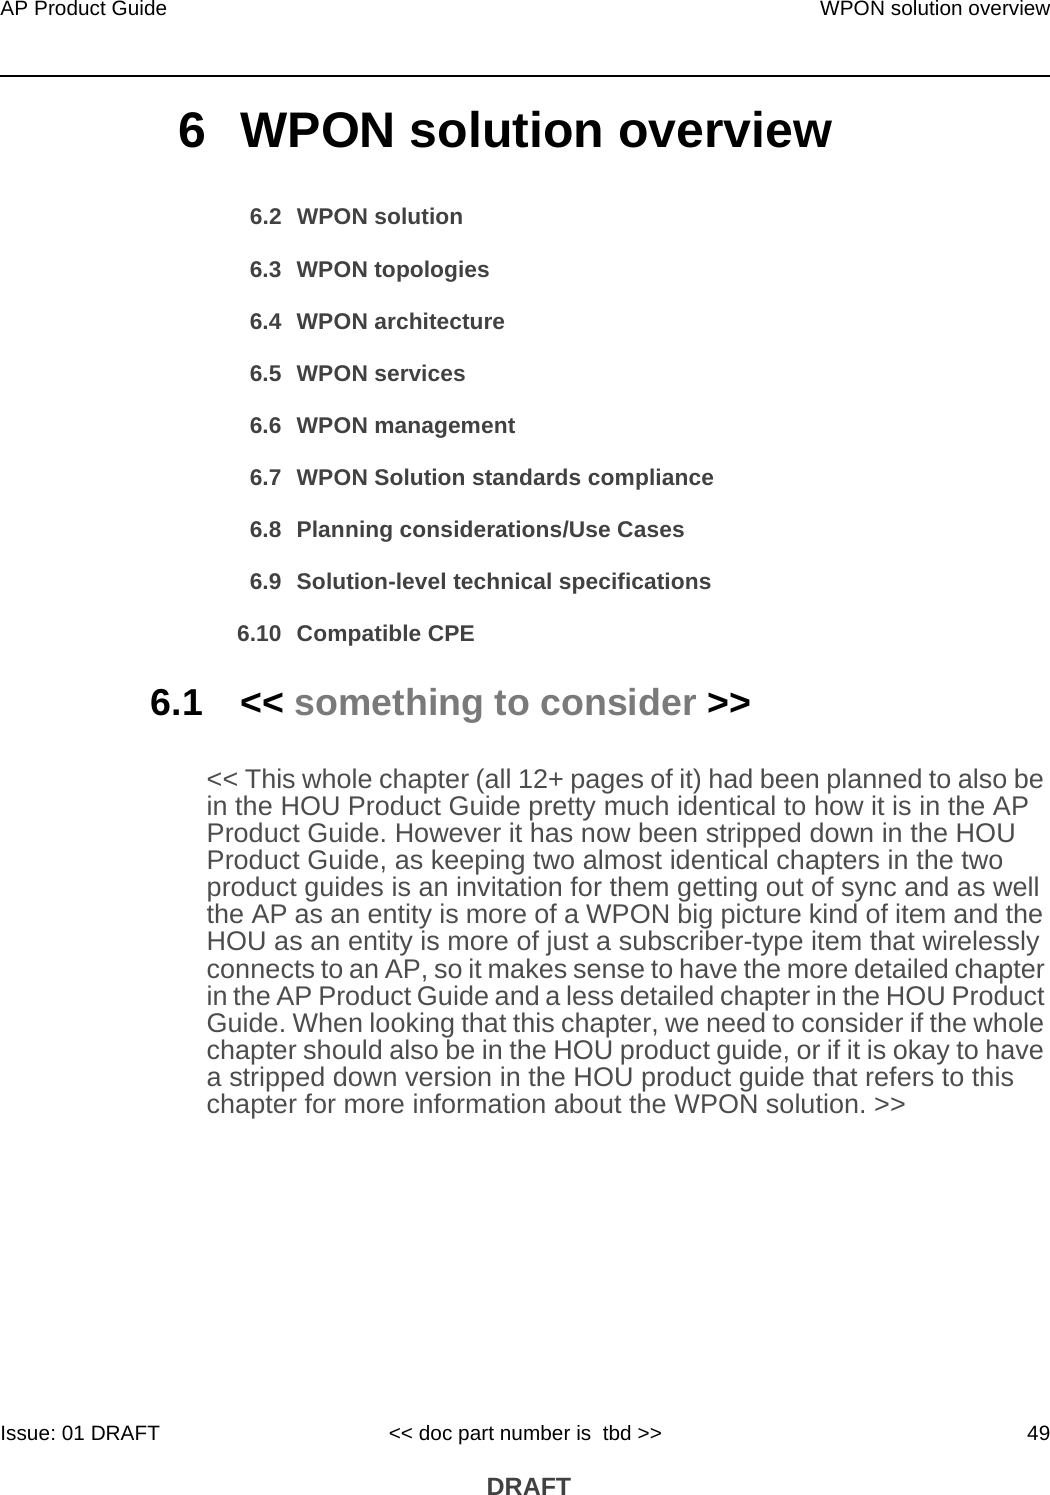 AP Product Guide WPON solution overviewIssue: 01 DRAFT &lt;&lt; doc part number is  tbd &gt;&gt; 49 DRAFT6 WPON solution overview6.2 WPON solution6.3 WPON topologies6.4 WPON architecture6.5 WPON services6.6 WPON management6.7 WPON Solution standards compliance6.8 Planning considerations/Use Cases6.9 Solution-level technical specifications6.10 Compatible CPE6.1 &lt;&lt; something to consider &gt;&gt;&lt;&lt; This whole chapter (all 12+ pages of it) had been planned to also be in the HOU Product Guide pretty much identical to how it is in the AP Product Guide. However it has now been stripped down in the HOU Product Guide, as keeping two almost identical chapters in the two product guides is an invitation for them getting out of sync and as well the AP as an entity is more of a WPON big picture kind of item and the HOU as an entity is more of just a subscriber-type item that wirelessly connects to an AP, so it makes sense to have the more detailed chapter in the AP Product Guide and a less detailed chapter in the HOU Product Guide. When looking that this chapter, we need to consider if the whole chapter should also be in the HOU product guide, or if it is okay to have a stripped down version in the HOU product guide that refers to this chapter for more information about the WPON solution. &gt;&gt;